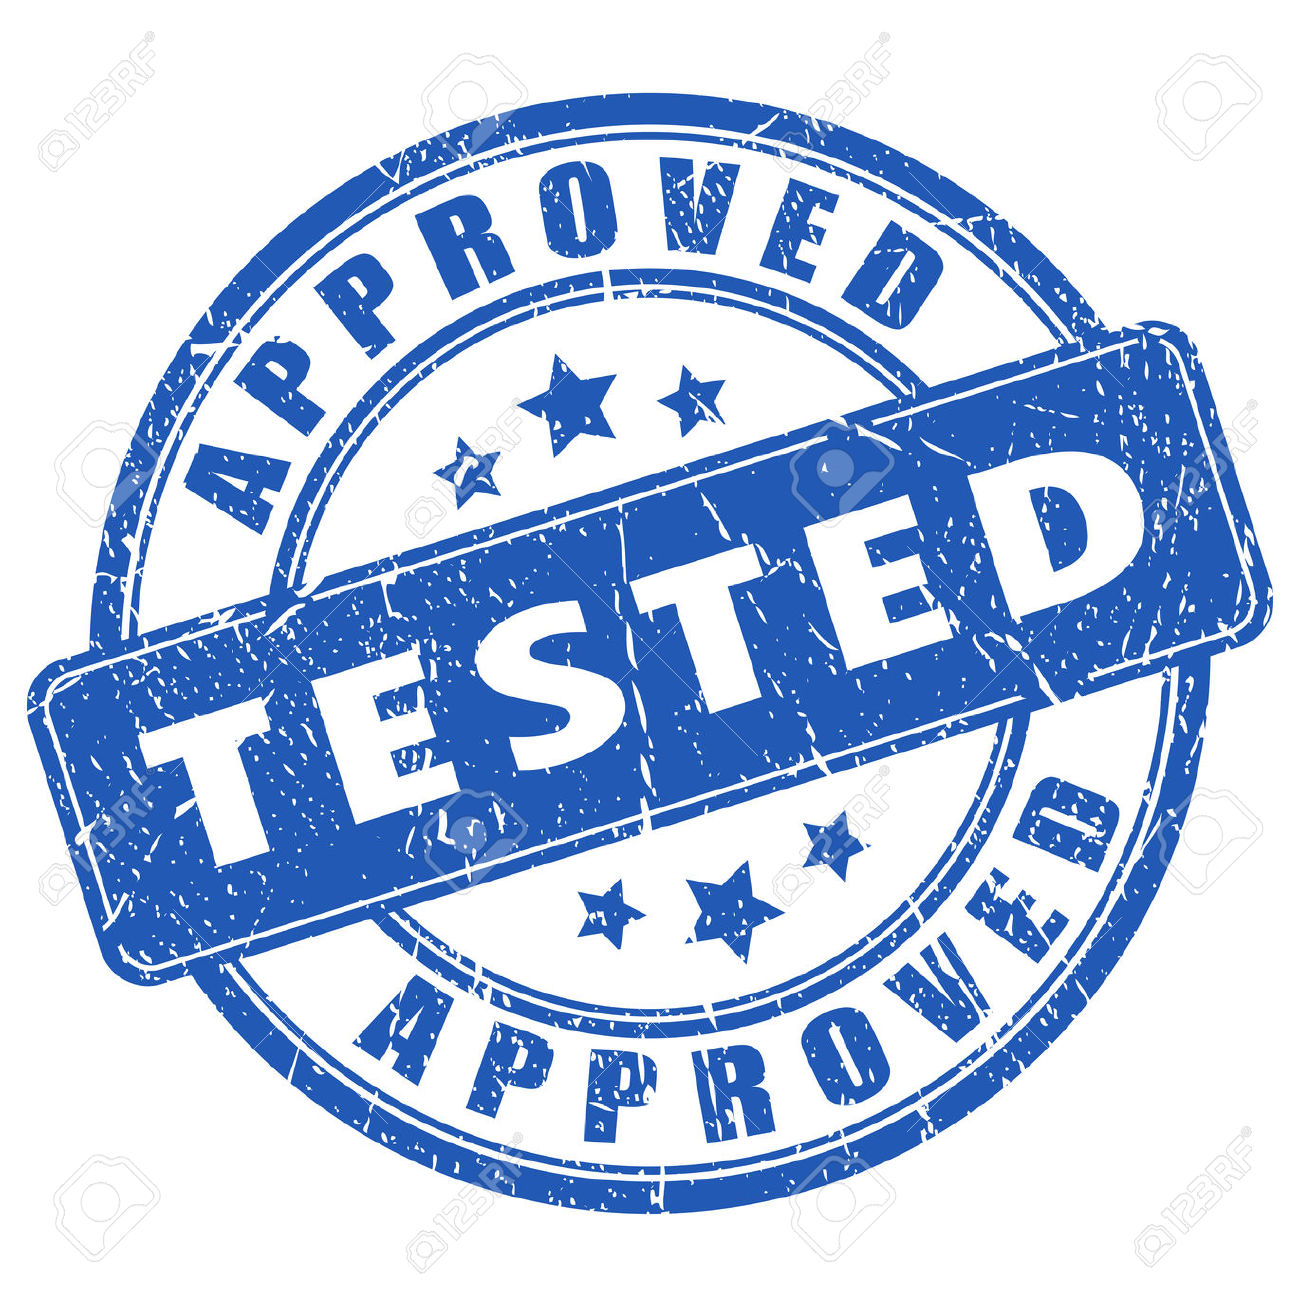 28904736-Tested-and-approved-stamp-Stock-Vector